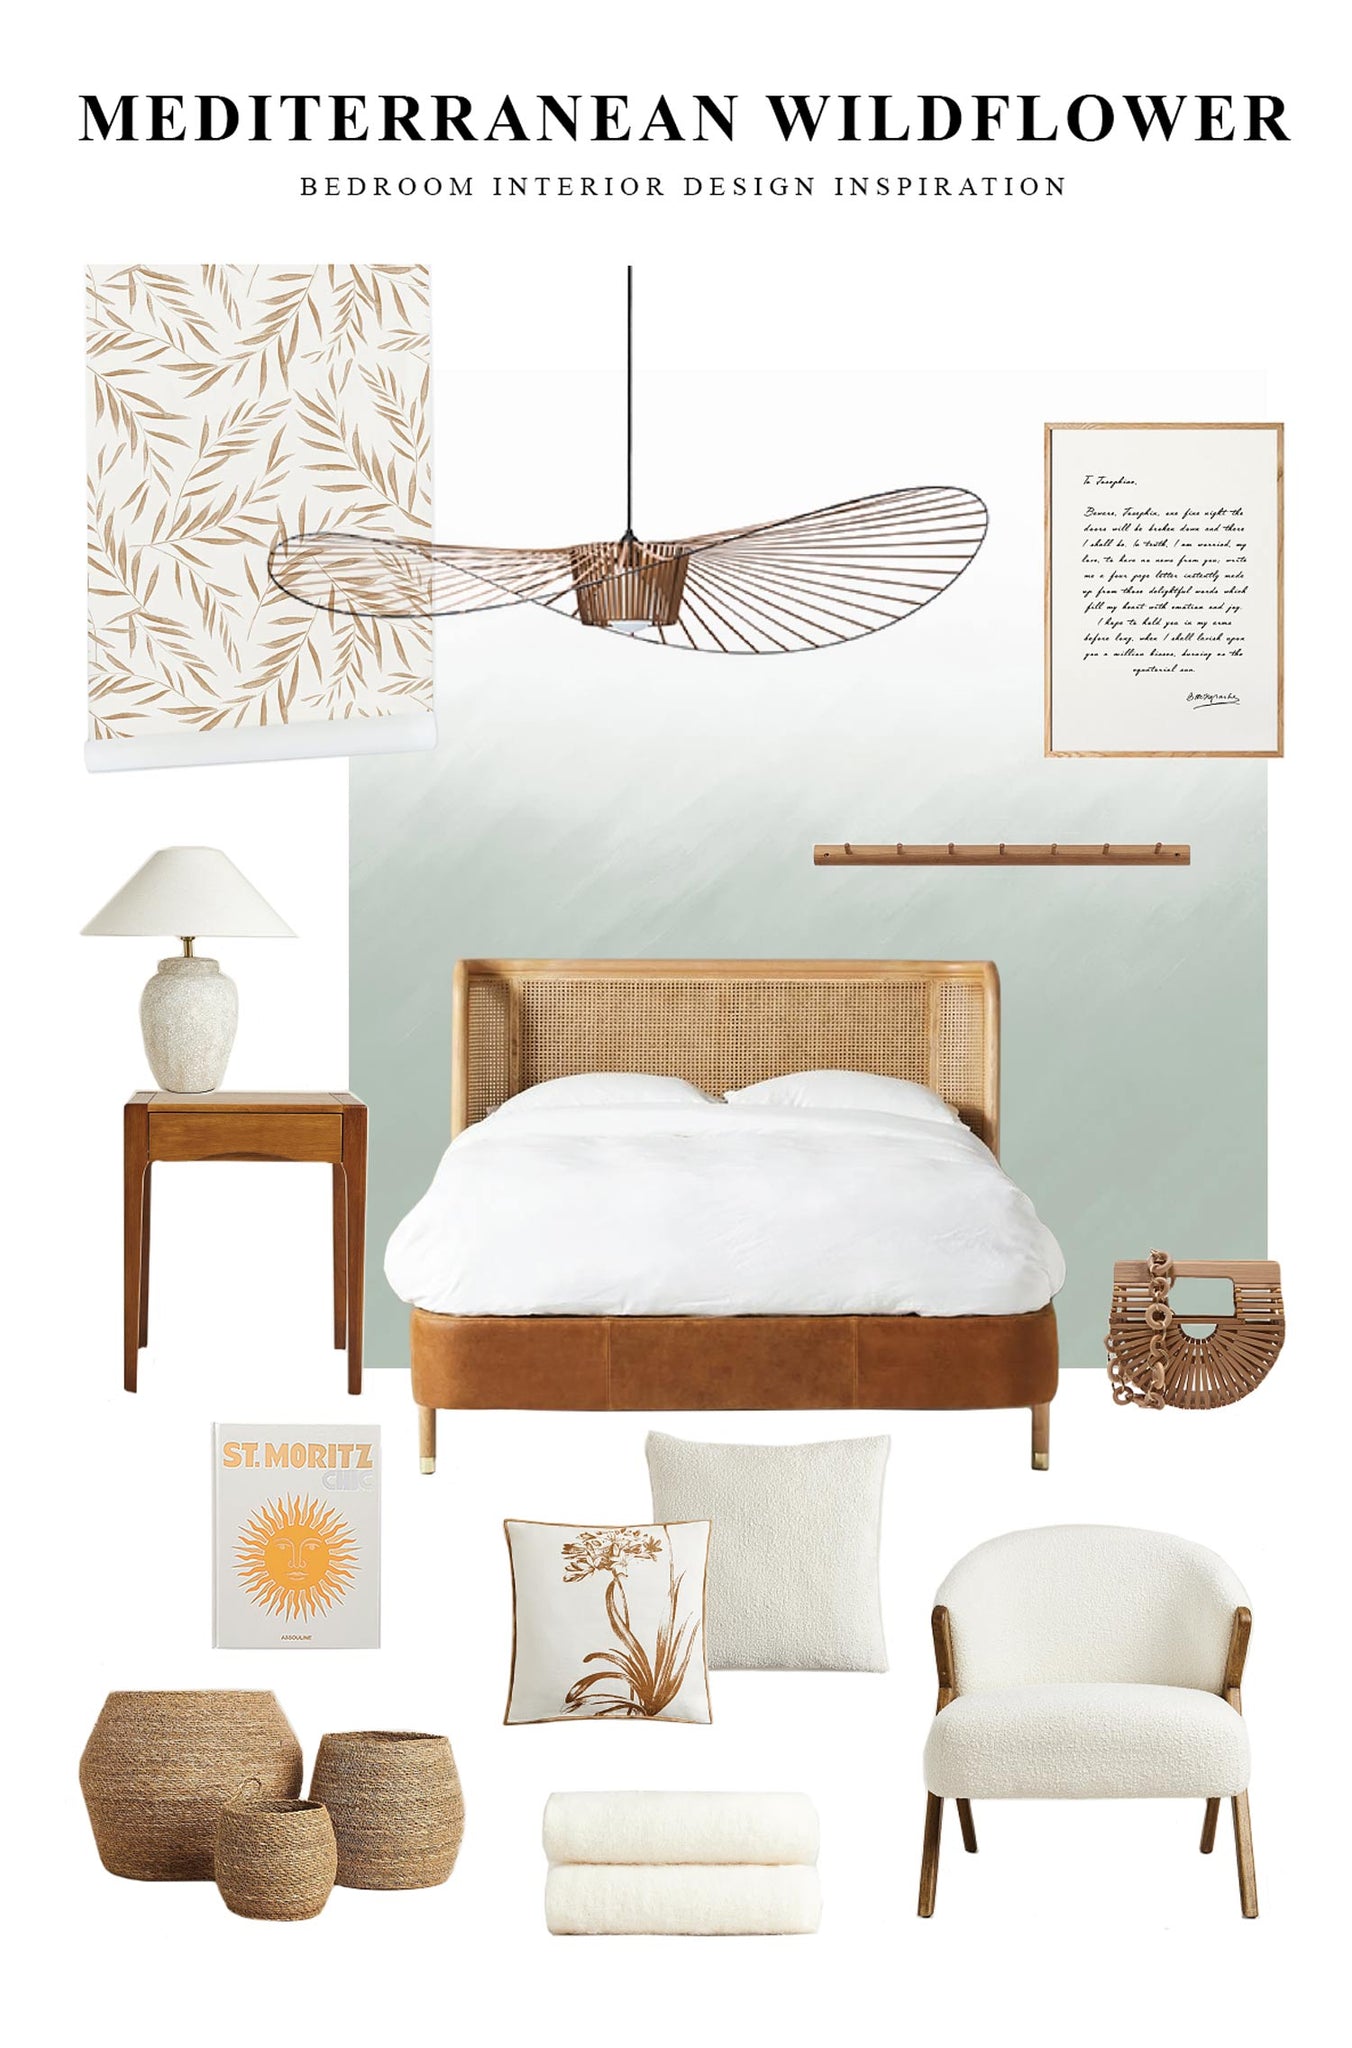 Sophisticated master bedroom interior design inspiration mood board with wildflower foliage removable wallpaper